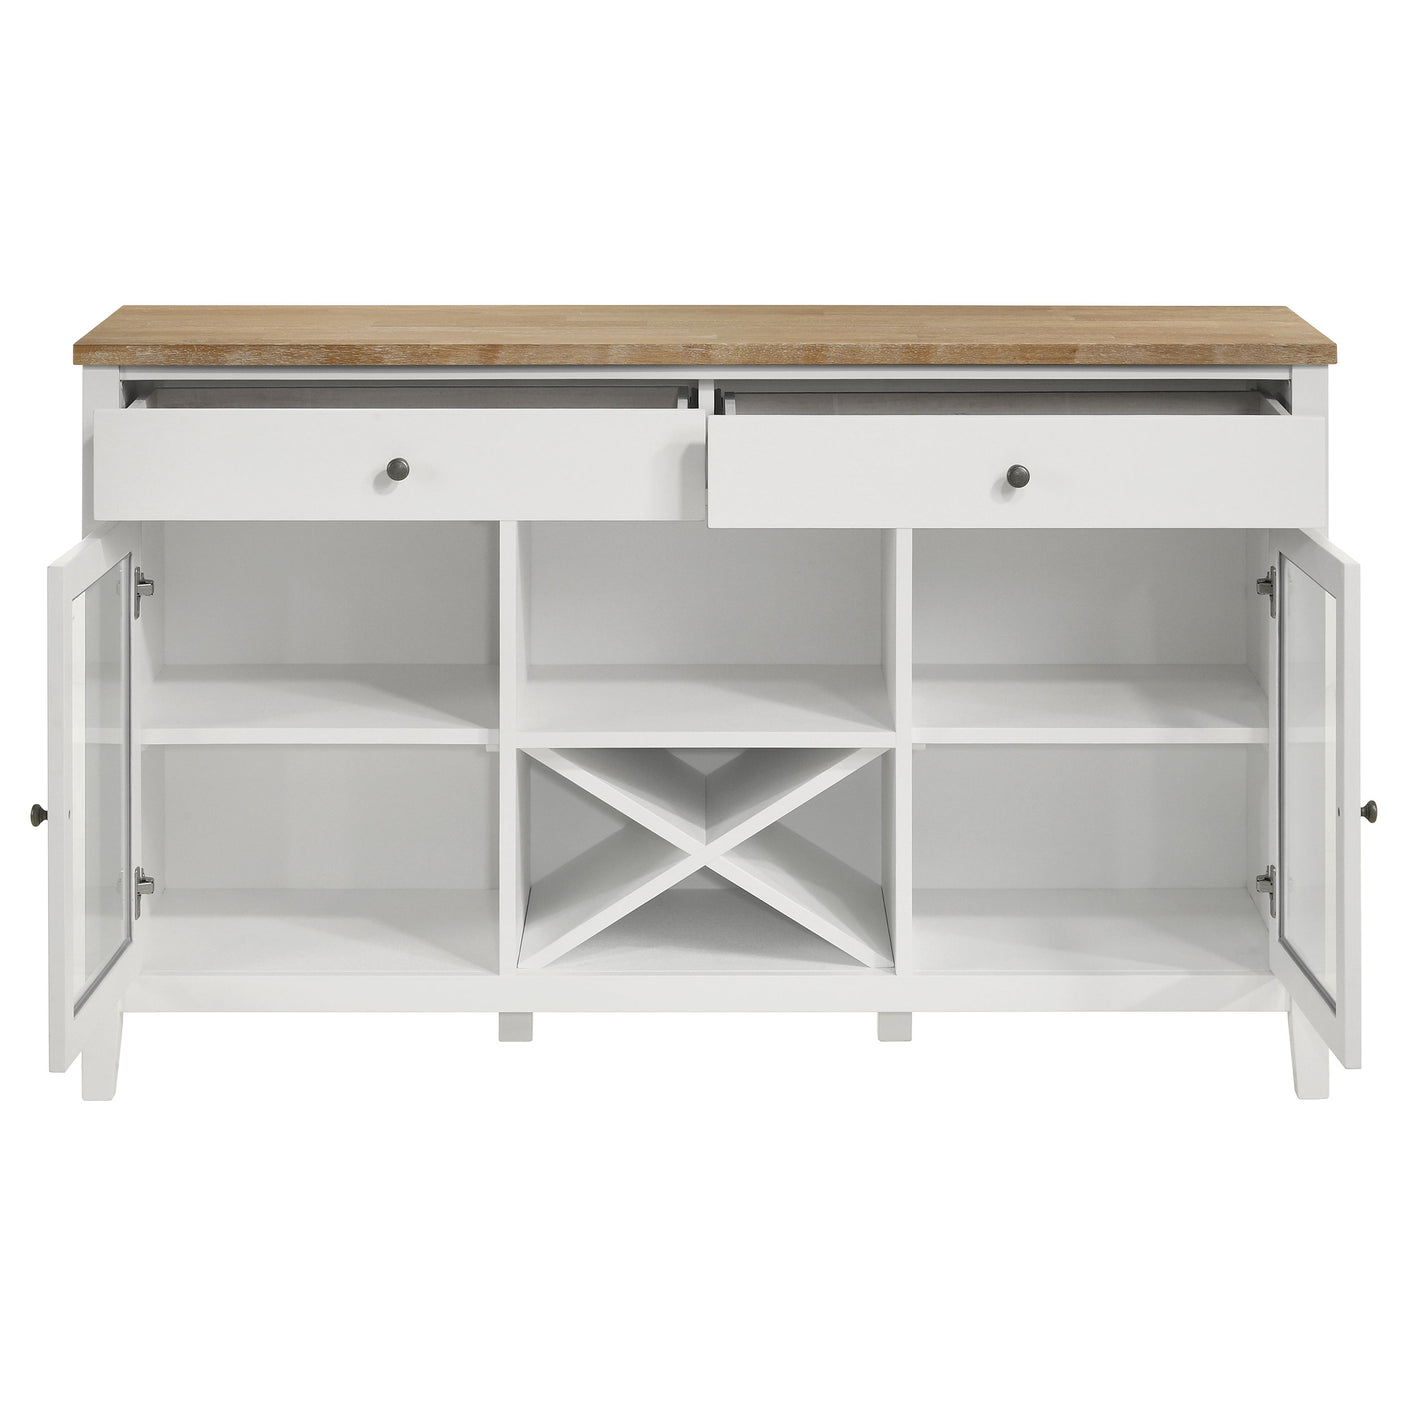 Sideboard - Hollis 2-door Dining Sideboard with Drawers Brown and White